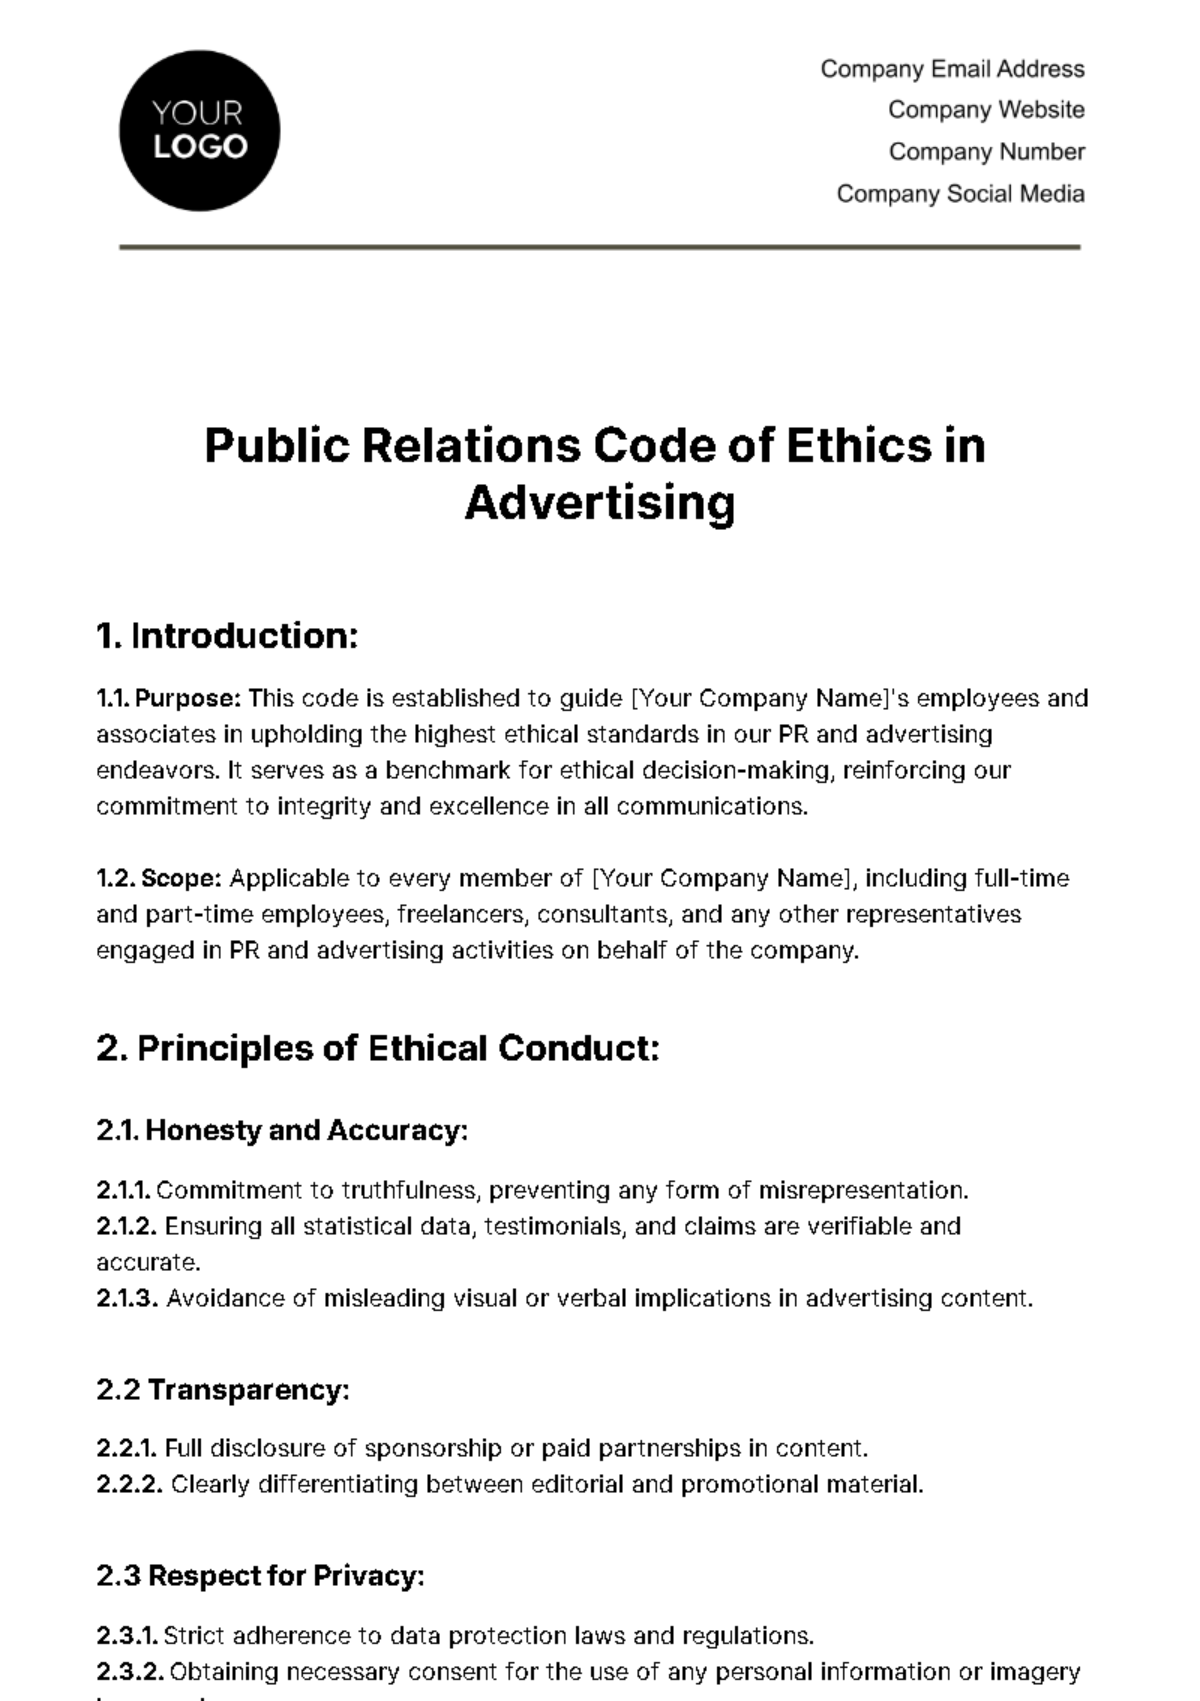 Public Relations Code of Ethics in Advertising Template